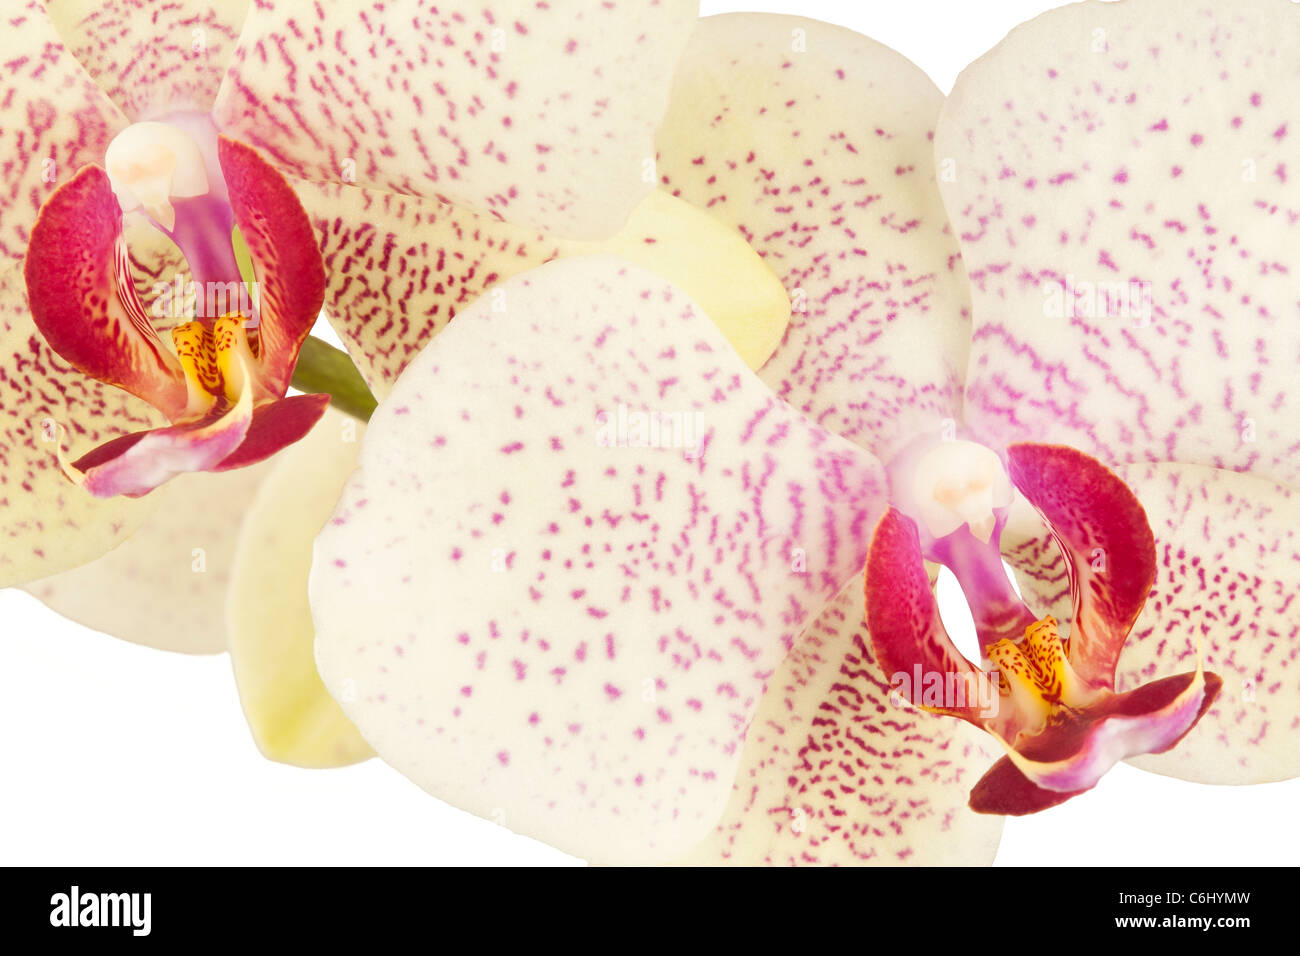 Two orchid flowers close up Stock Photo